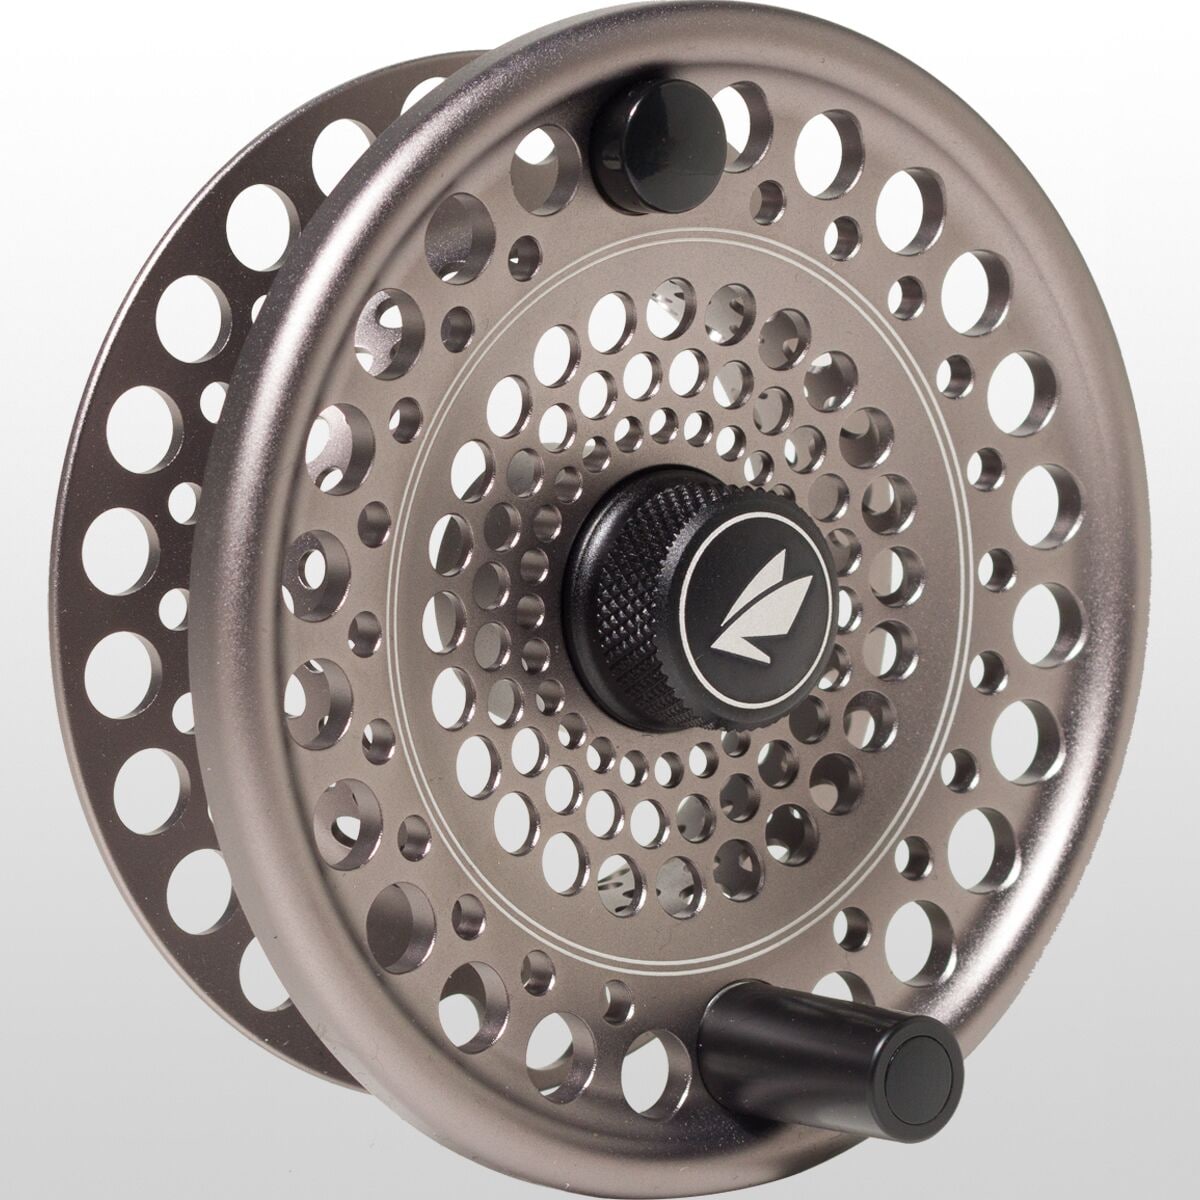 Sage Trout Spool - Fly Fishing